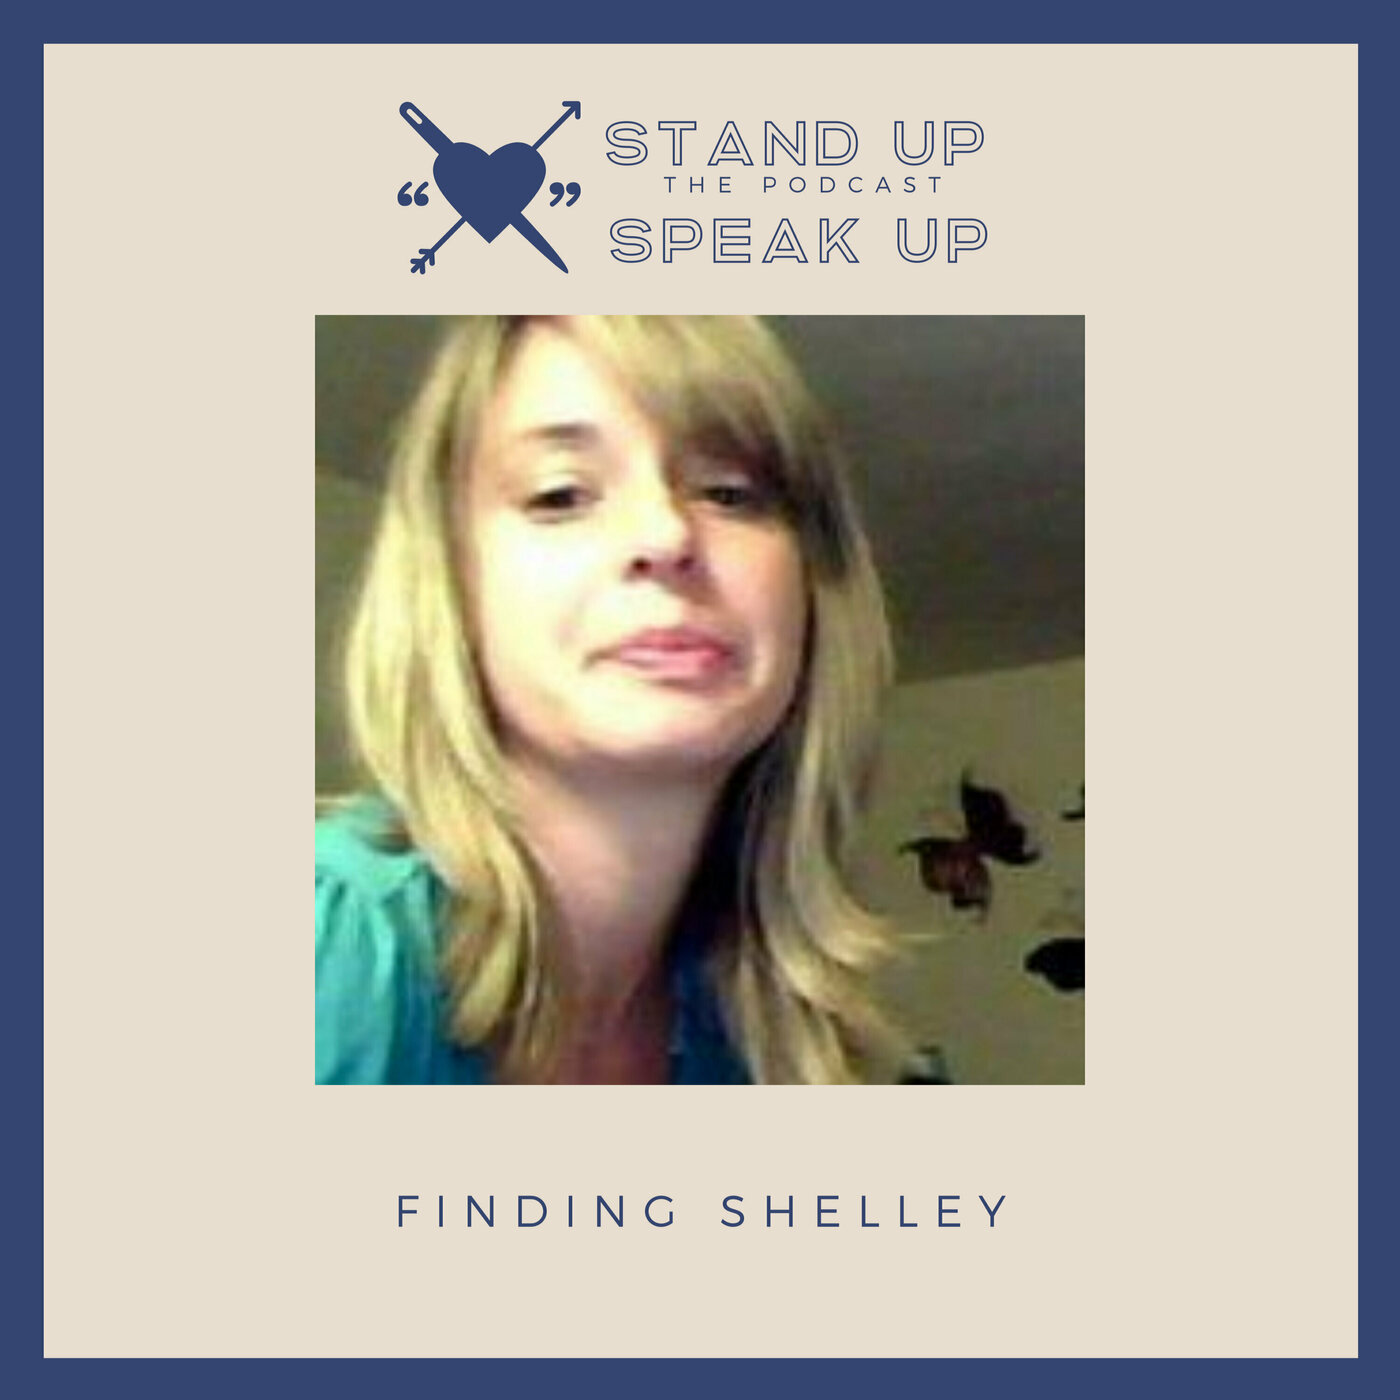 Finding Shelley Desrochers: Part 3 - What Happened to Shelley?